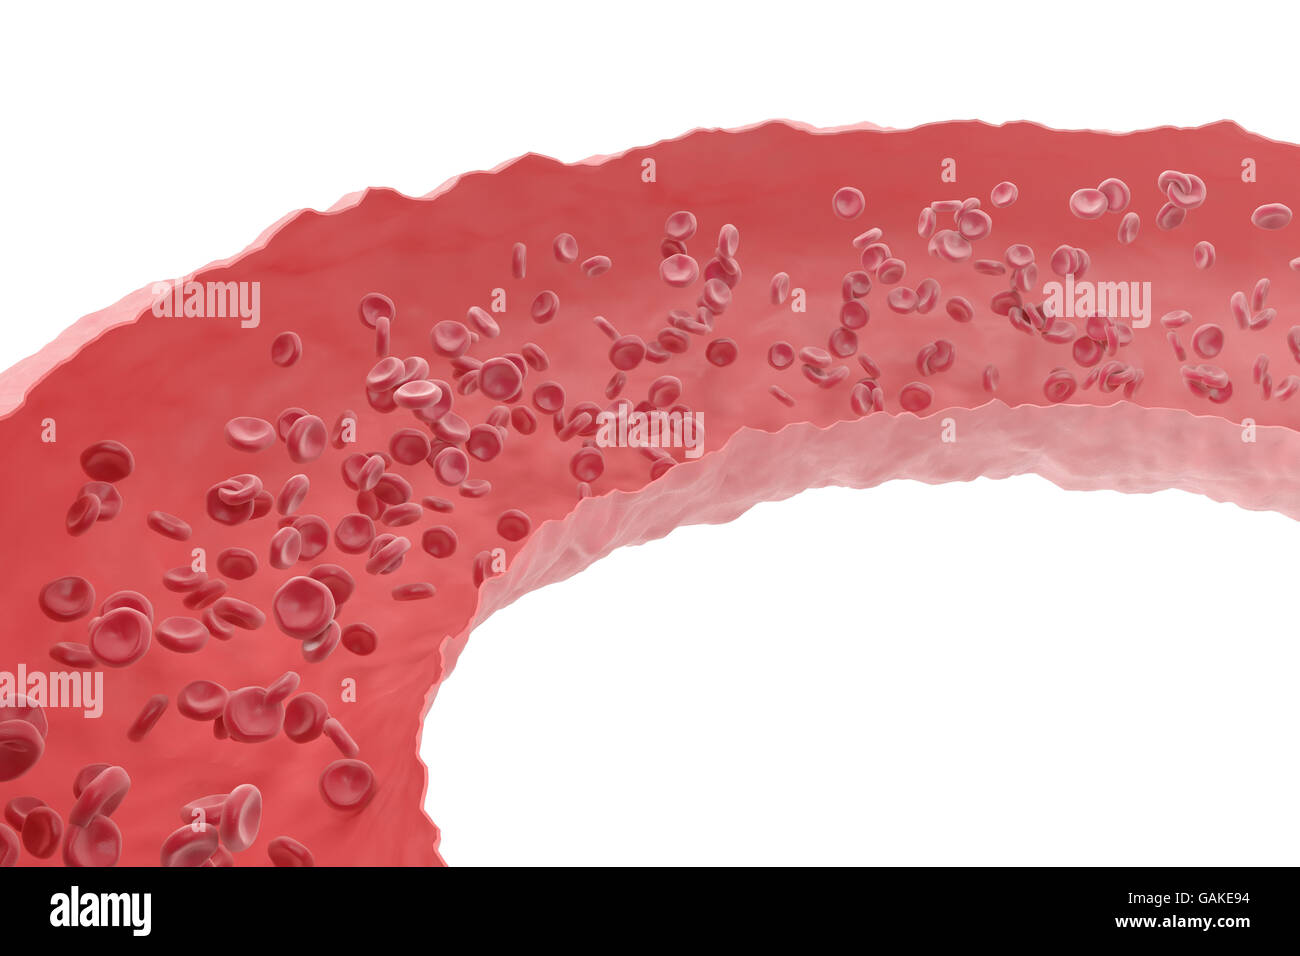 Red blood cells in cut flowing through veins from the human circulatory system. 3d illustration Stock Photo